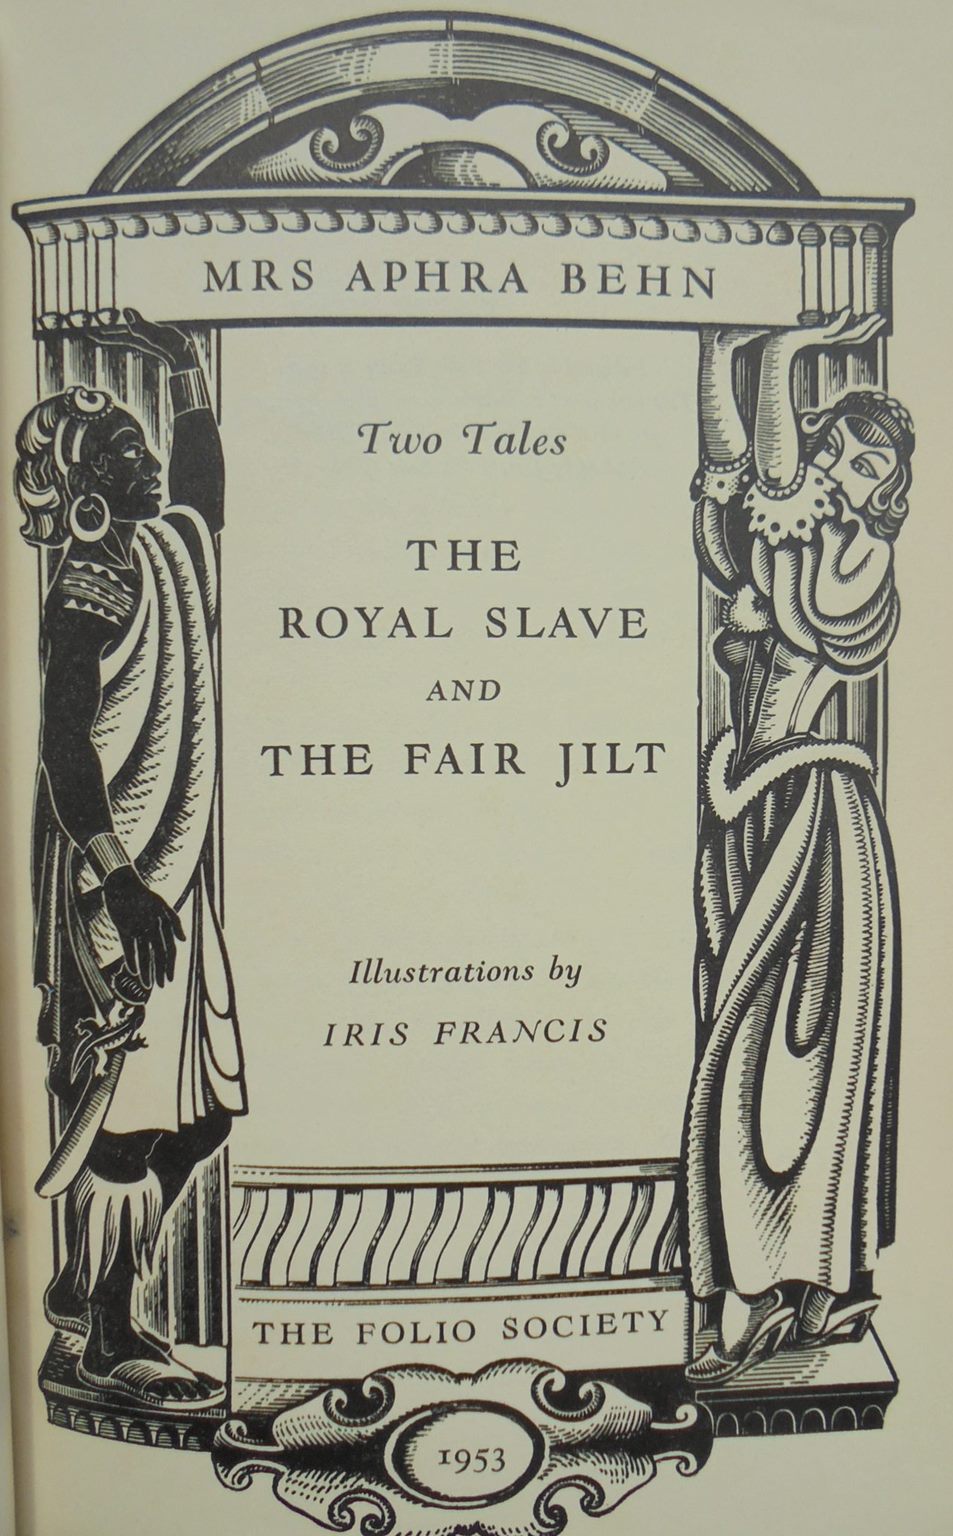 Two Tales: The Royal Slave and the Fair Jilt. By Mrs Aphra Behn (1953) 1st edition.